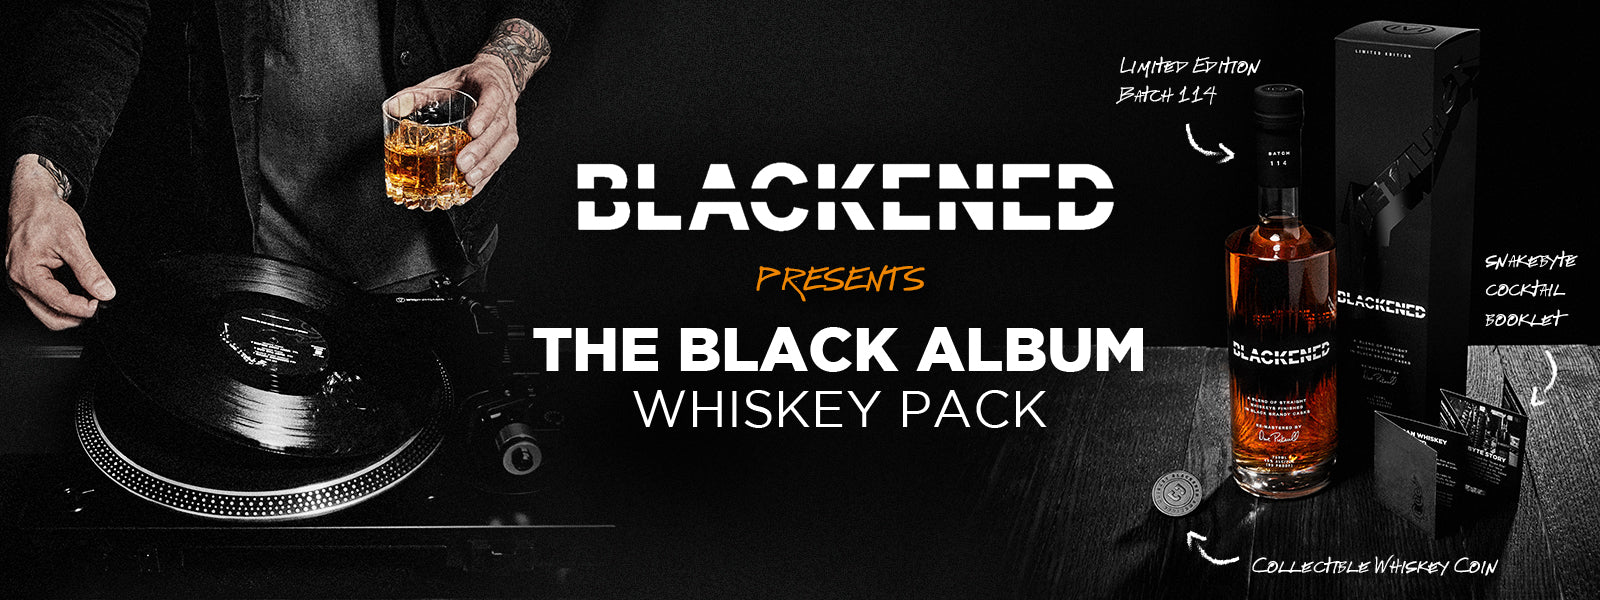 Buy Blackened's Batch 114 Limited Edition Whiskey by Metallica Online at CaskCartel.com